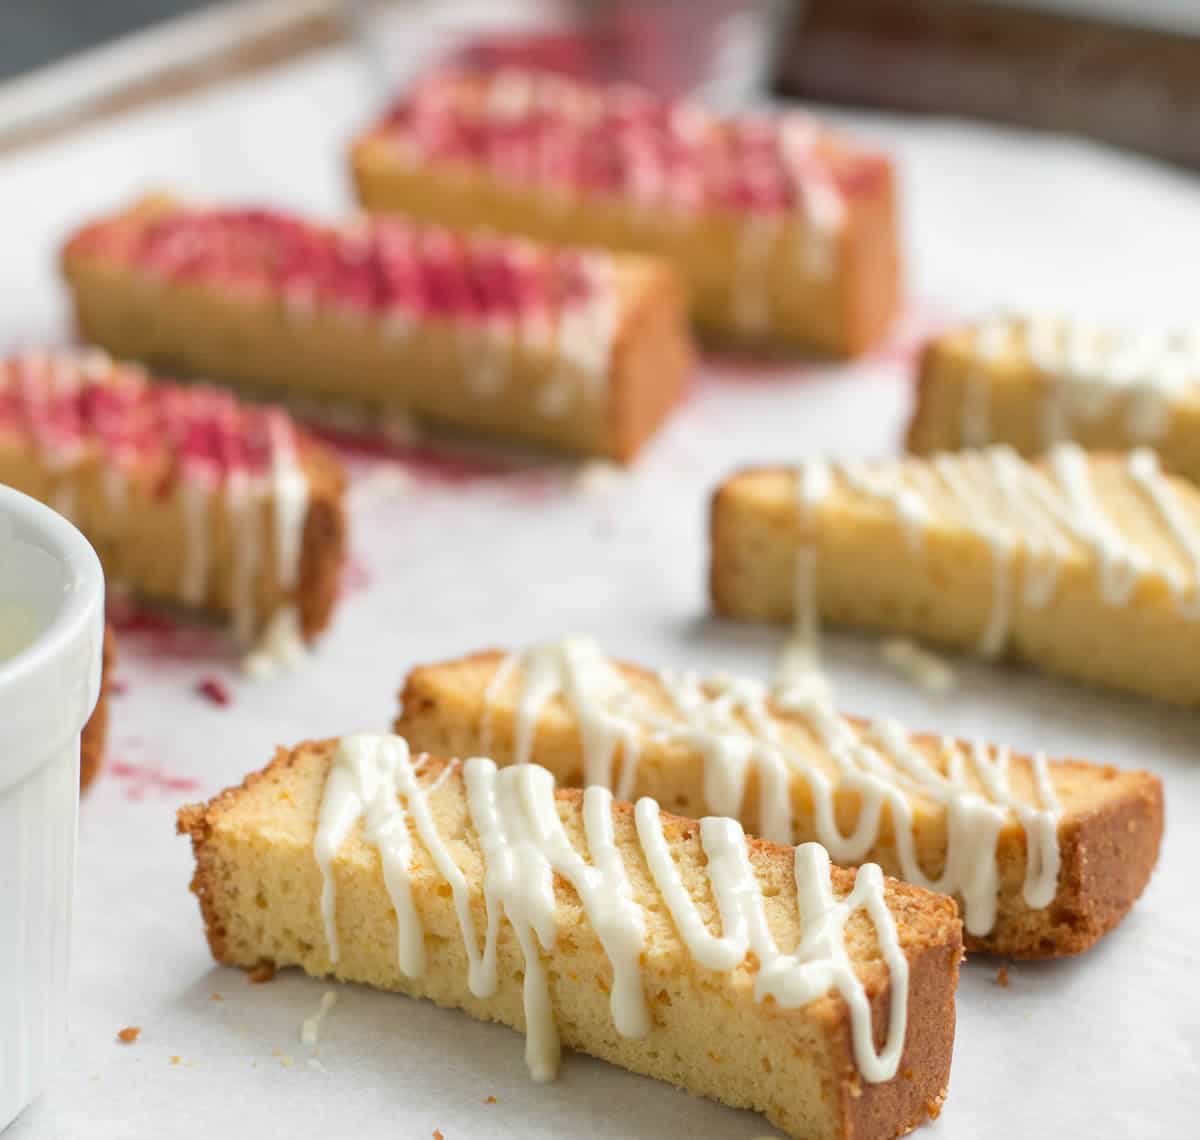 Raspberry White Chocolate Pound Cake Biscotti. Turn your cake into a cookie! Make crispy, crunchy biscotti from left over pound cake. Perfectly dunkable!